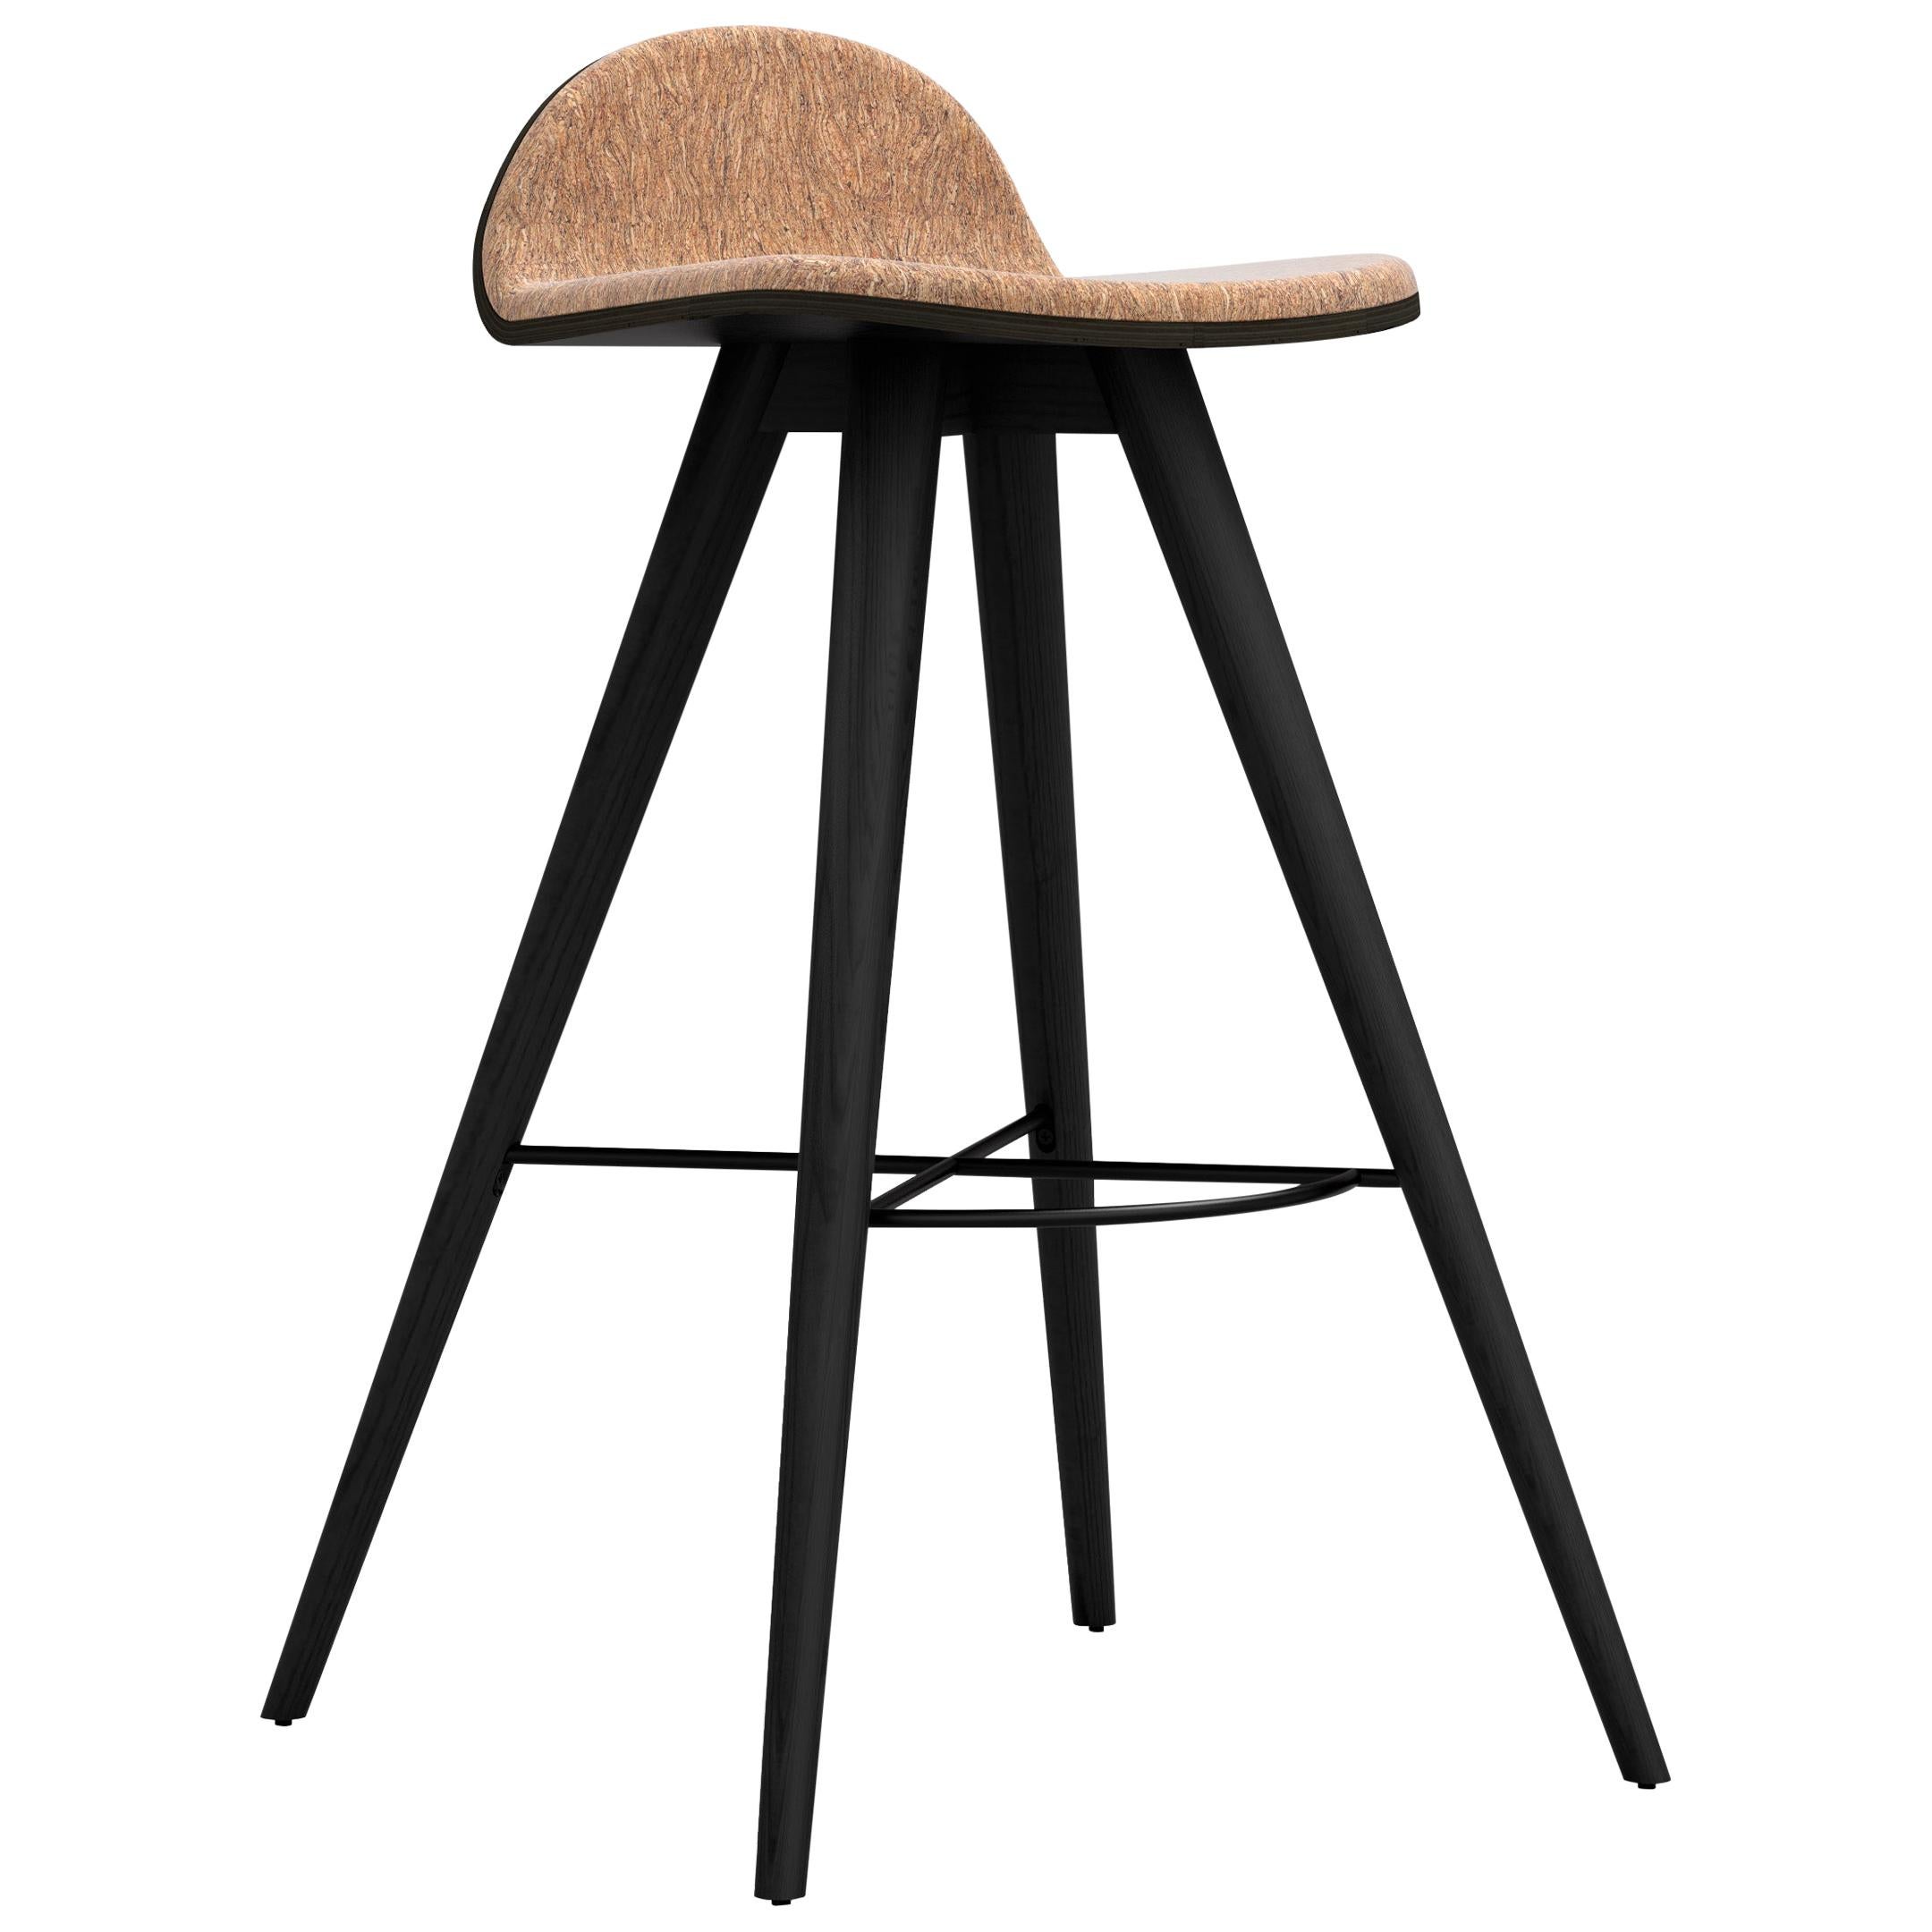 Painted Ash and Corkfabric Contemporary High Stool by Alexandre Caldas